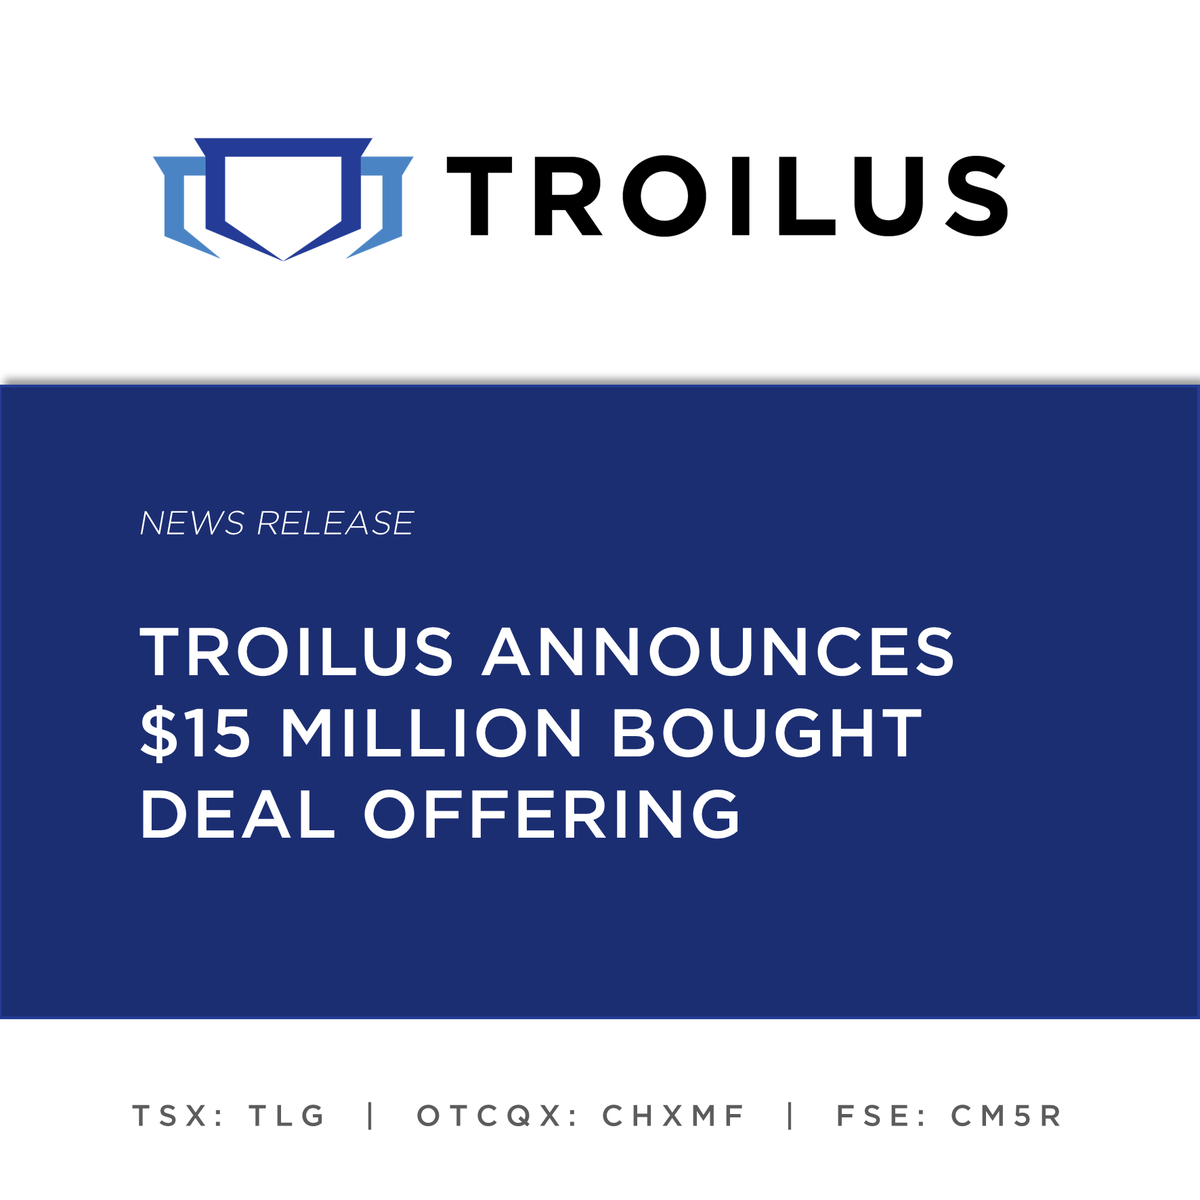 Troilus announces $15 million bought deal offering.
Read the press release here: troilusgold.net/PR   

$TLG $CHXMF $CM5R
#newsrelease #TroilusGold #Troilus #gold #copper #exploration #tlg #canadiangold #juniormining #mining #investing #geology #quebecmining